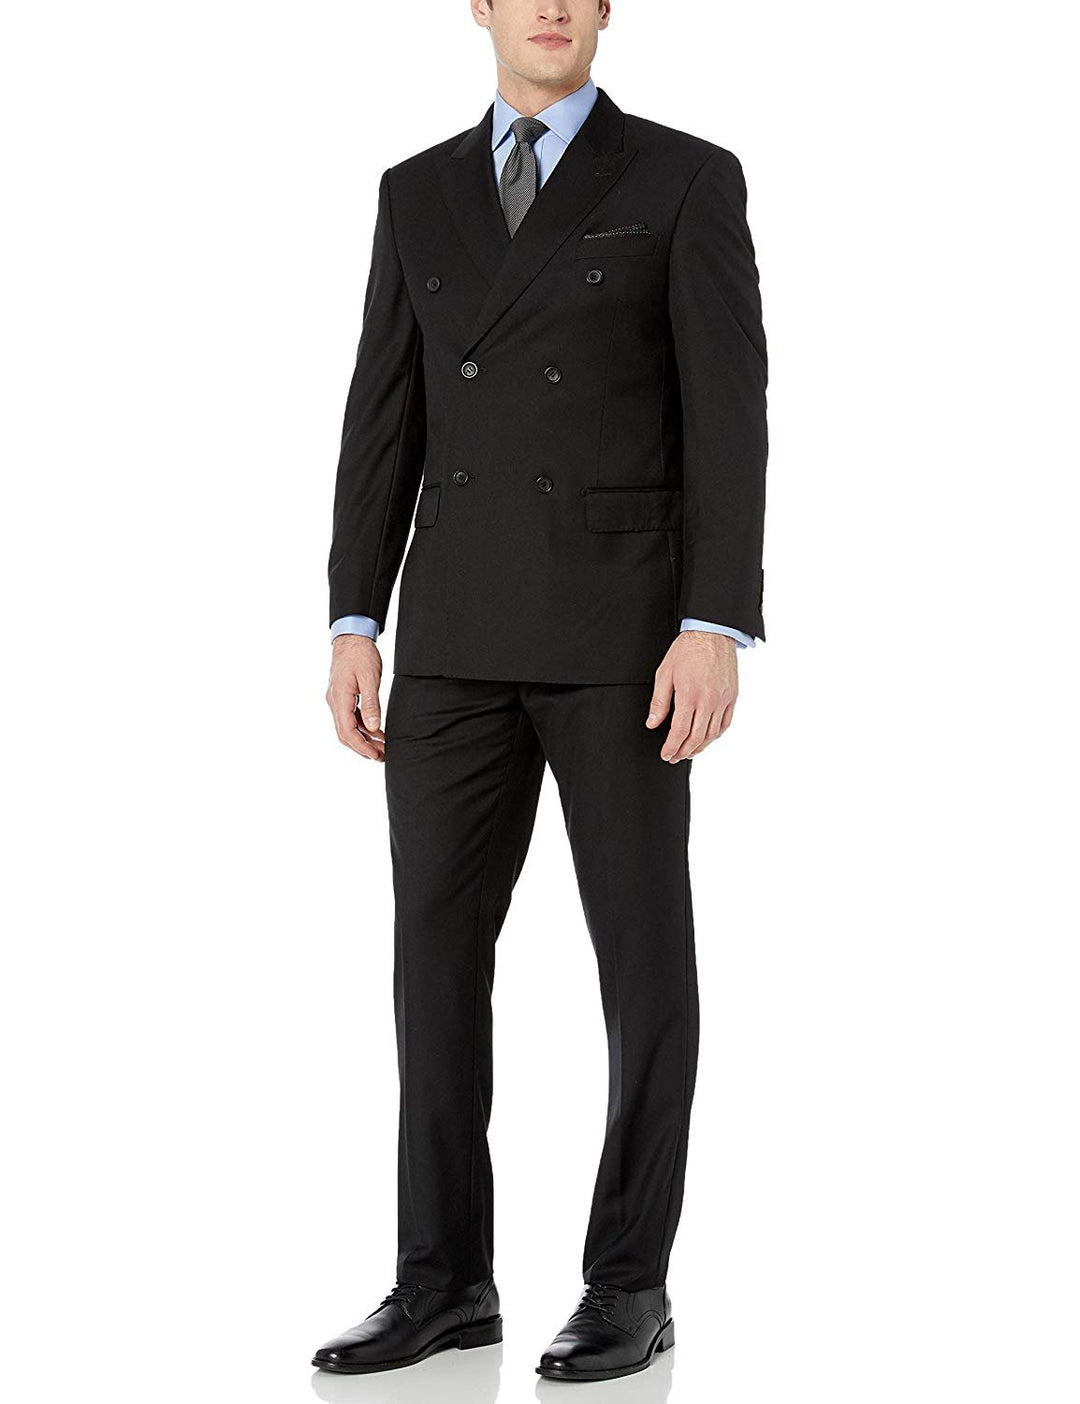 Statement Men's Modern Fit Double Breasted Two Piece Suit Set - CLEARANCE - FINAL SALE